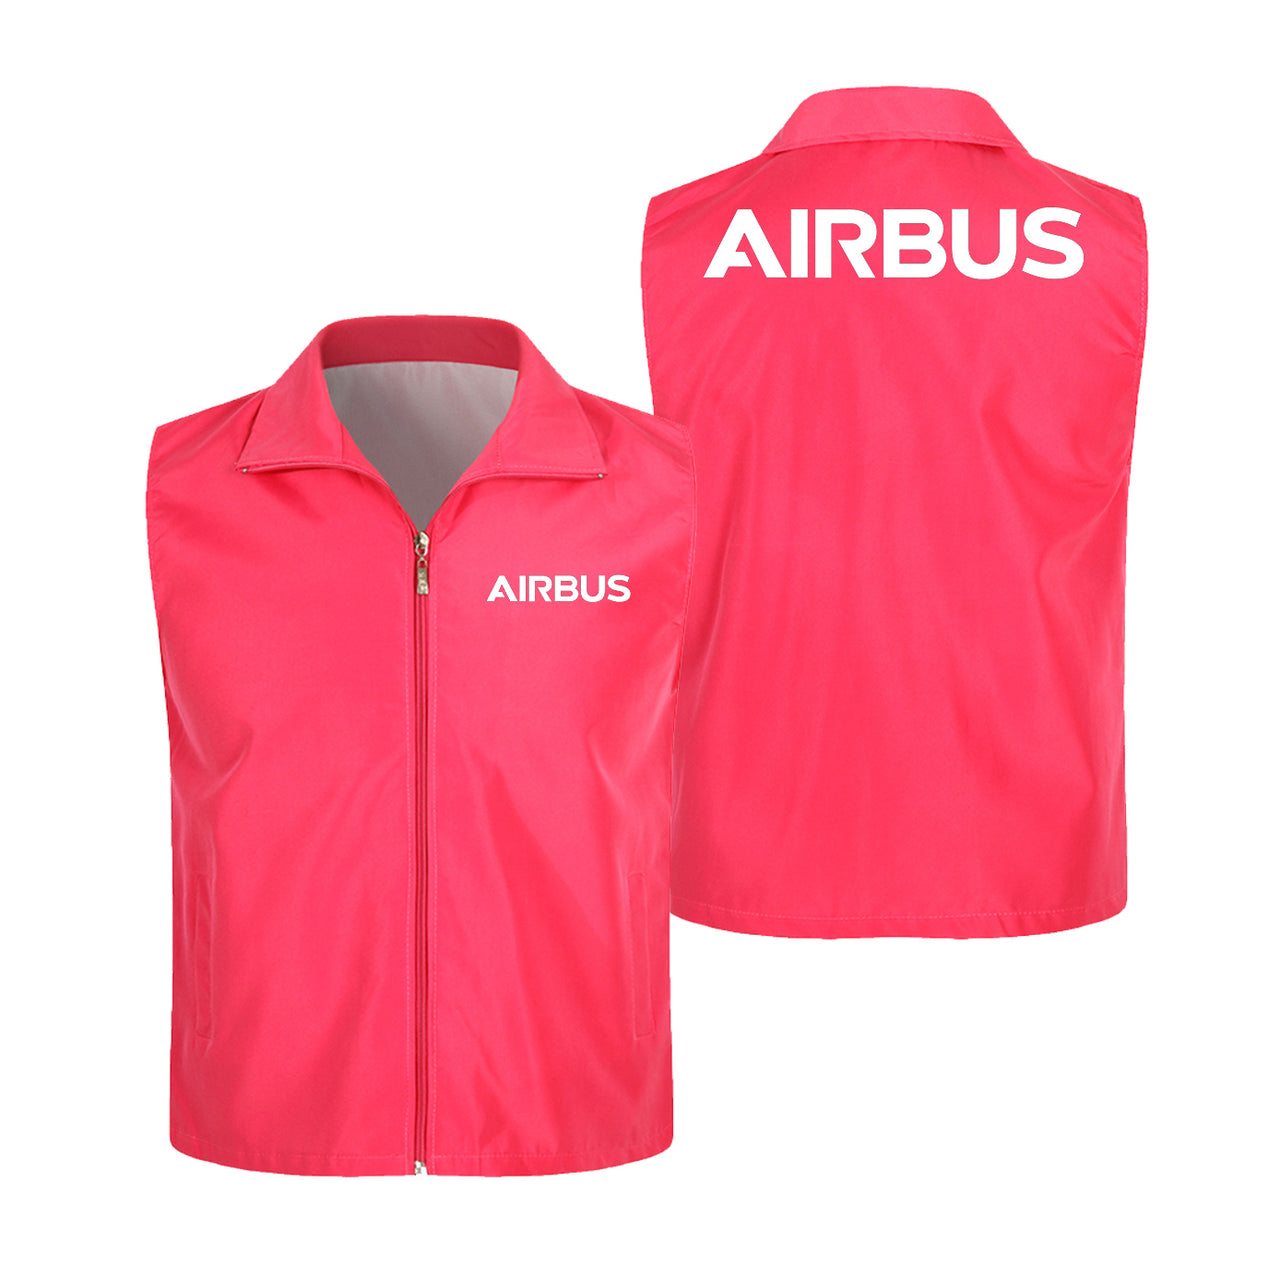 Airbus & Text Designed Thin Style Vests